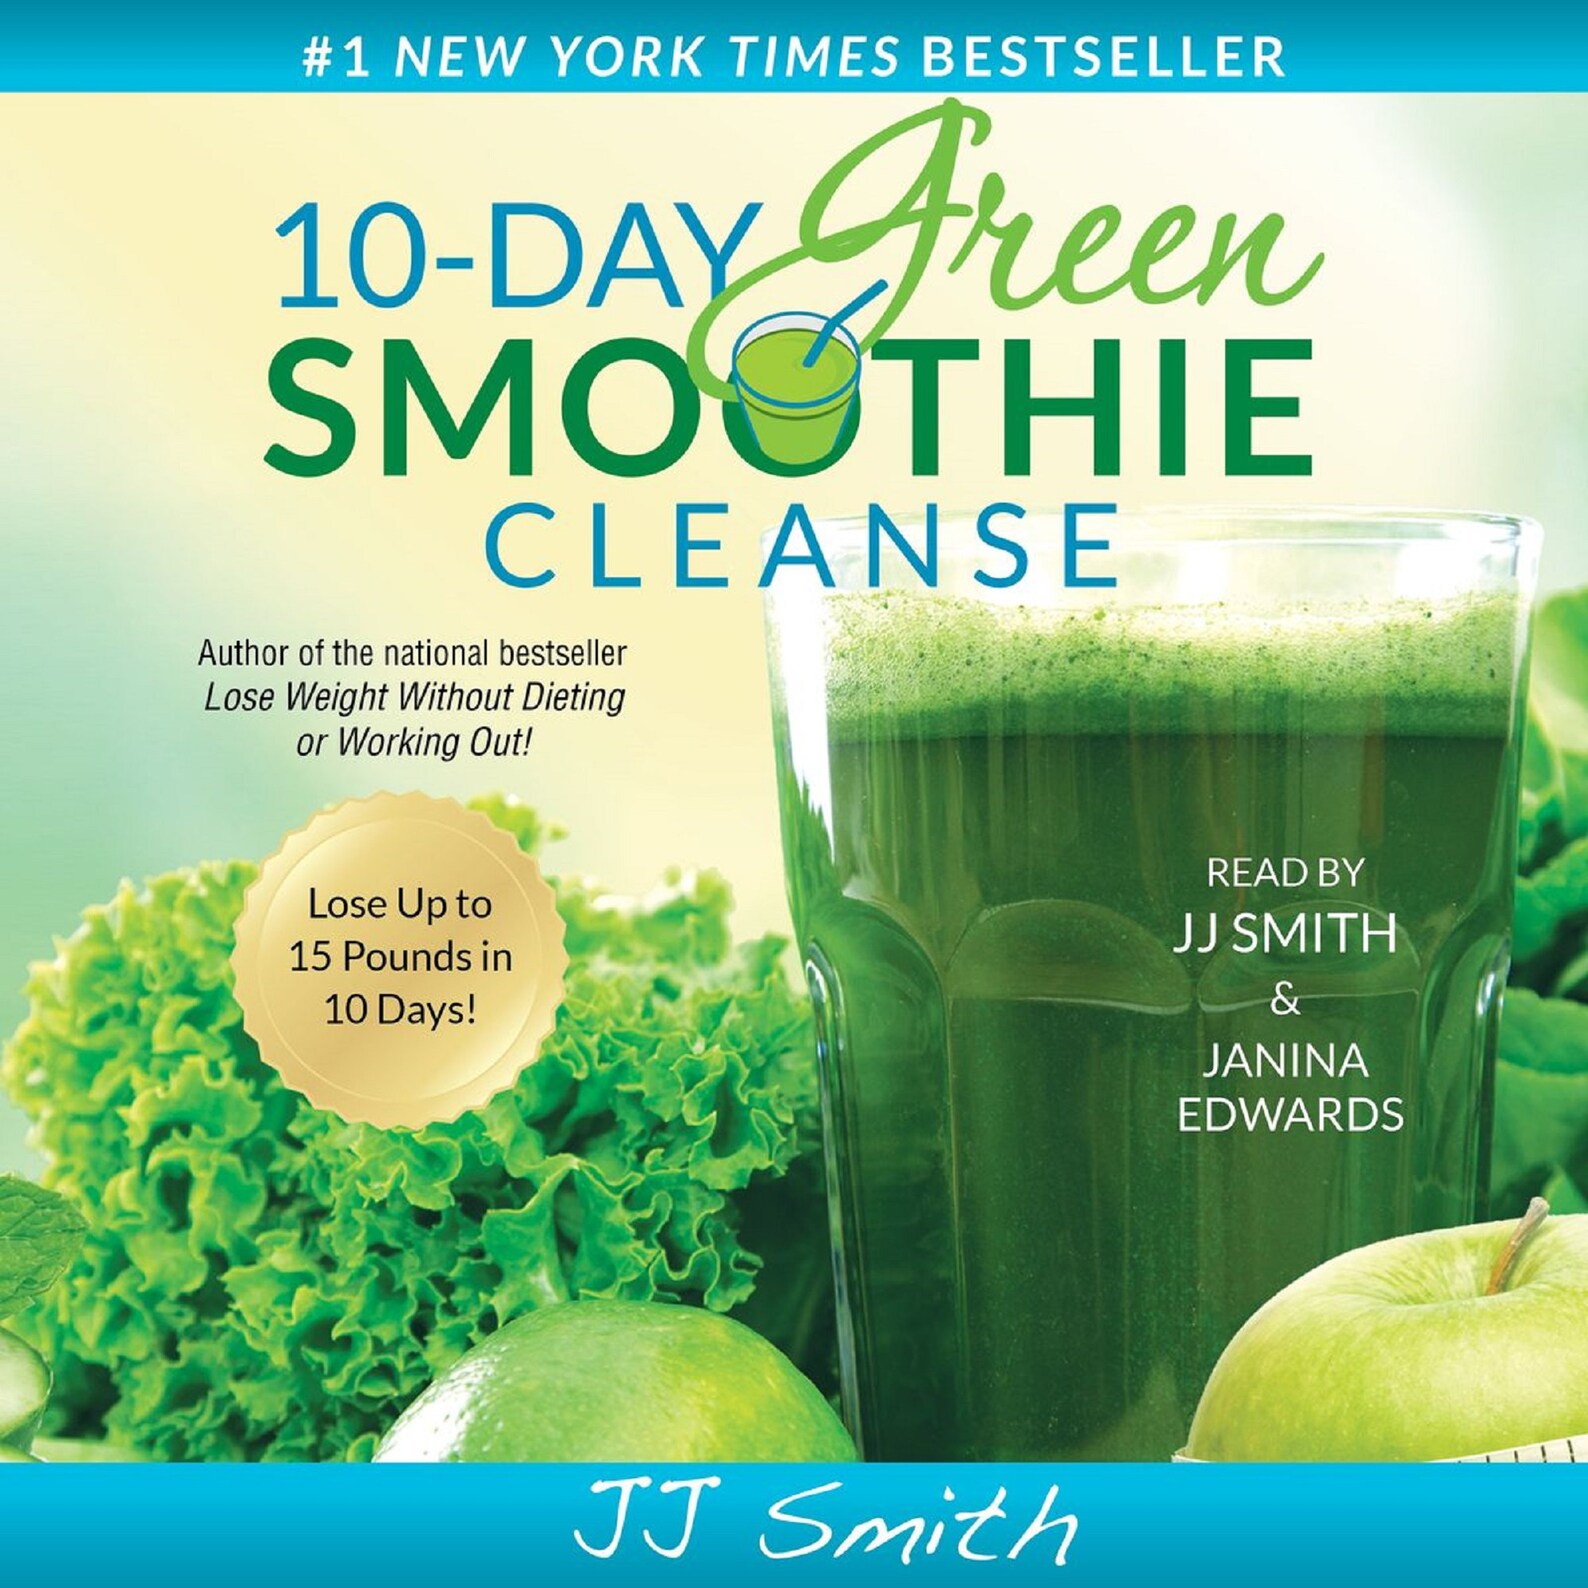 10-Day Green Smoothie Cleanse by JJ Smith Digital Download.